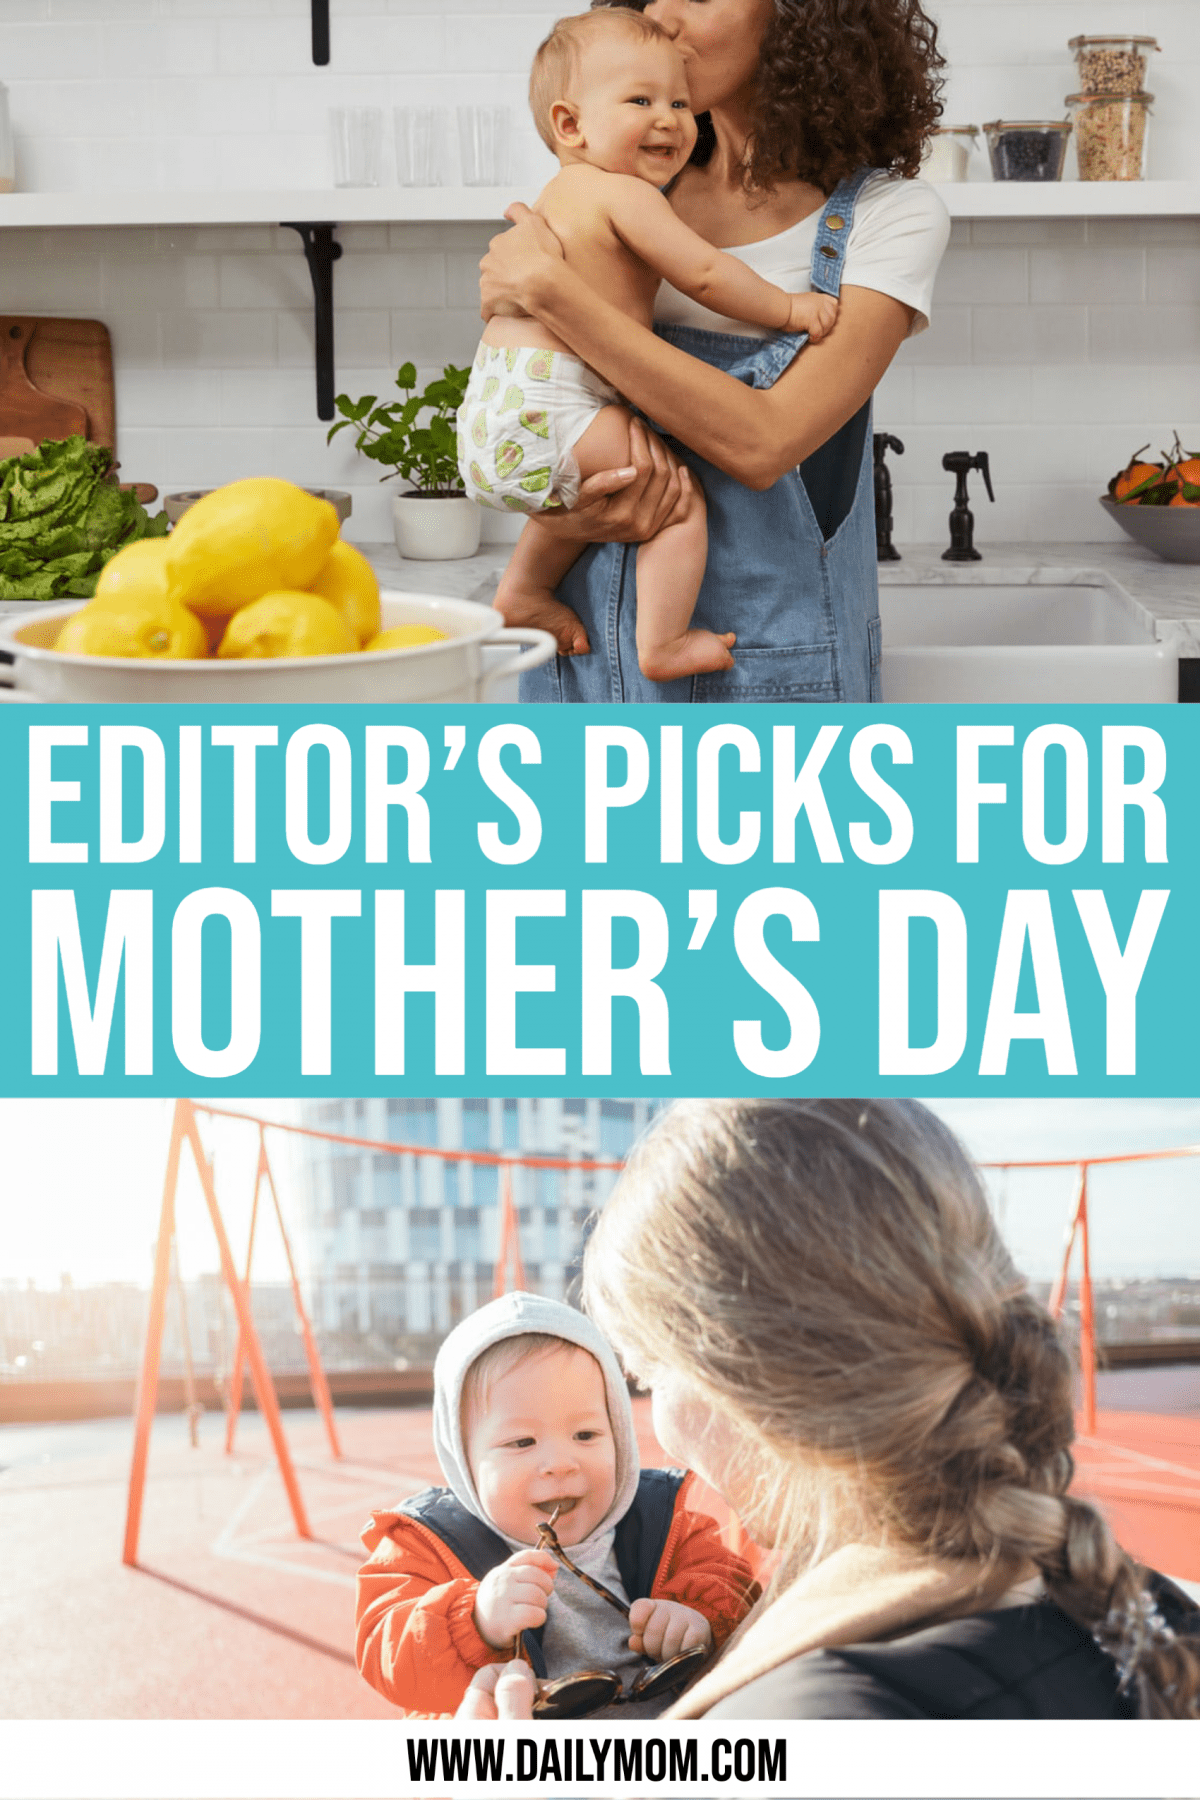 Editor’s Picks For The Perfect Mother’s Day Gift